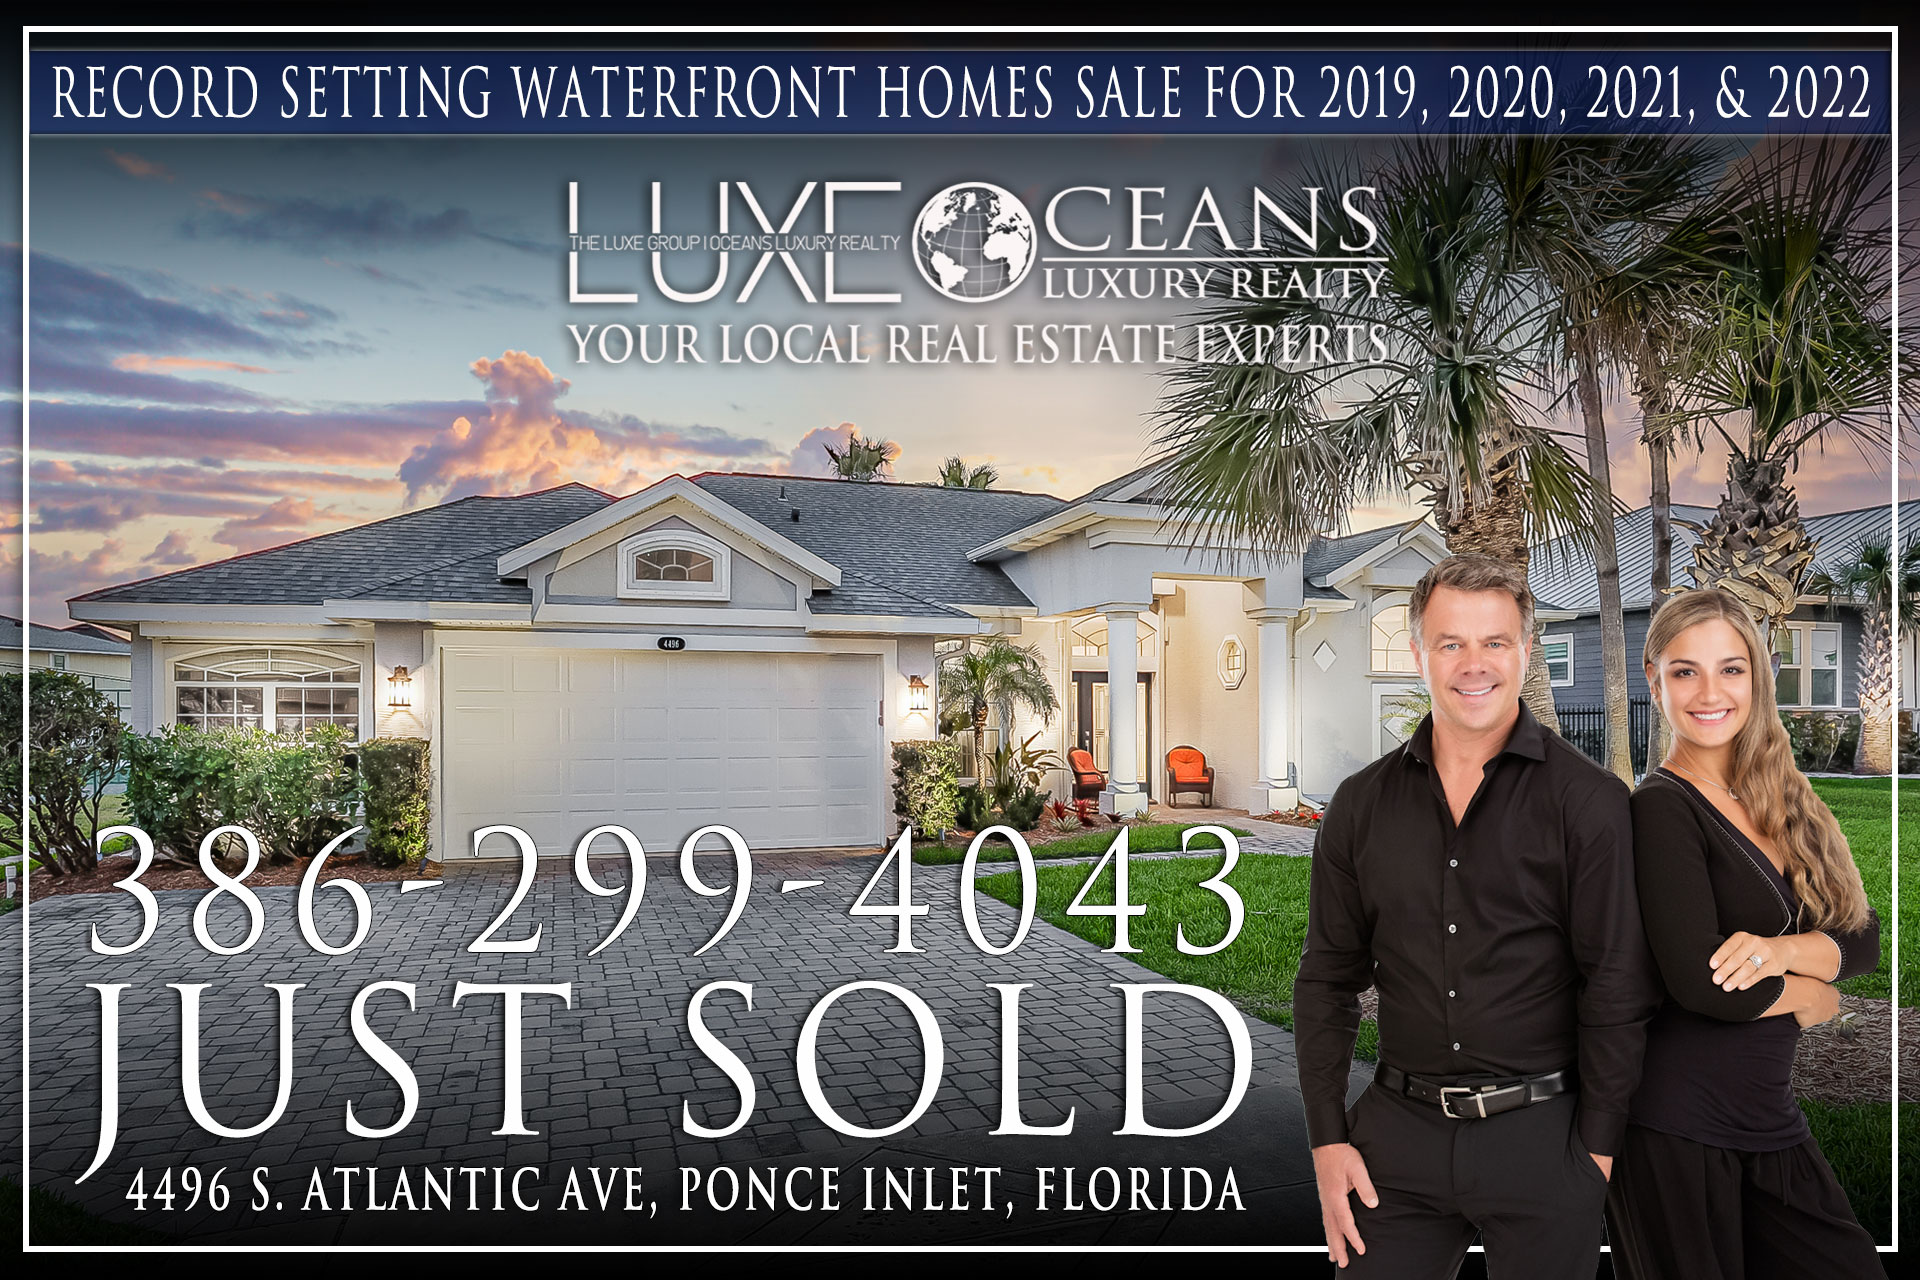 Ponce Inlet Florida Homes For Sale. Just Sold. 4496 S Atlantic Ave in Ponce Inlet is now under contract. The LUXE Group at Oceans Luxury Realty 386-299-4043